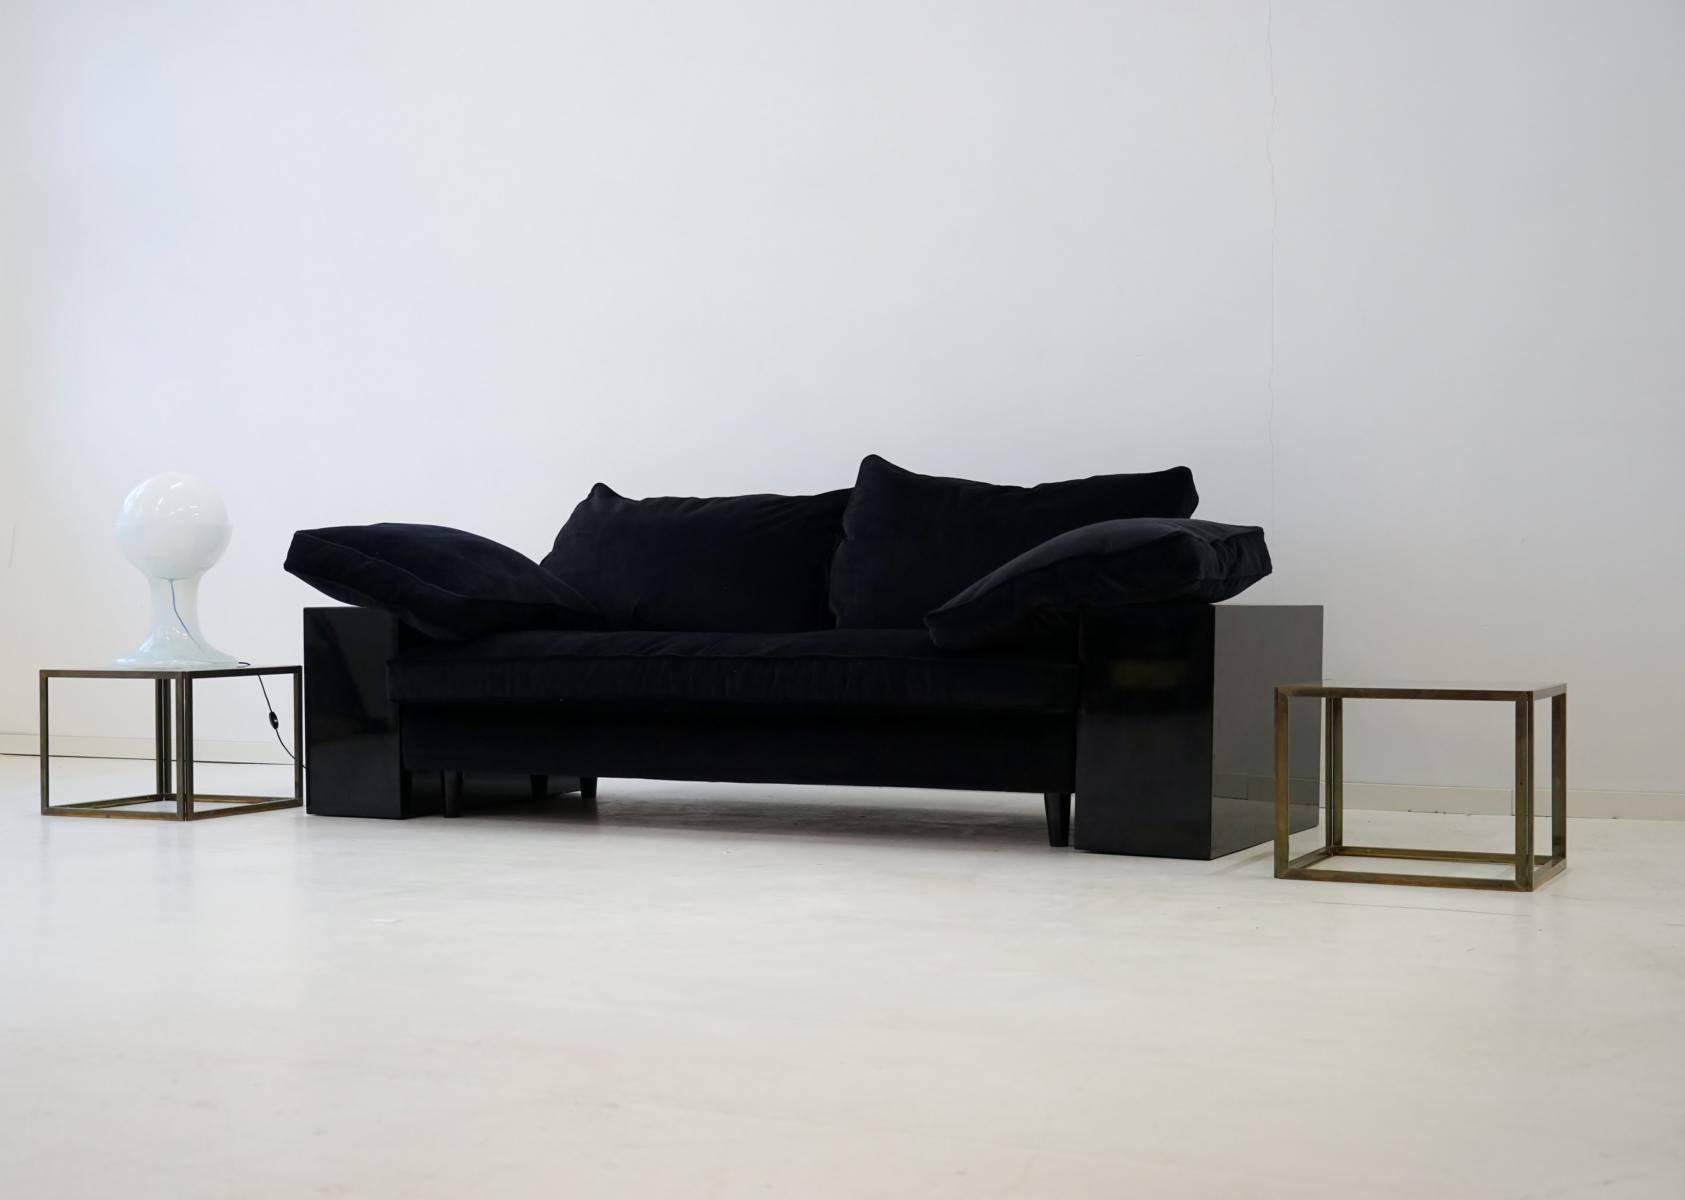 Early 20th Century 19th Century Sofa Lota by Eileen Gray Canapé Lounge Daybed